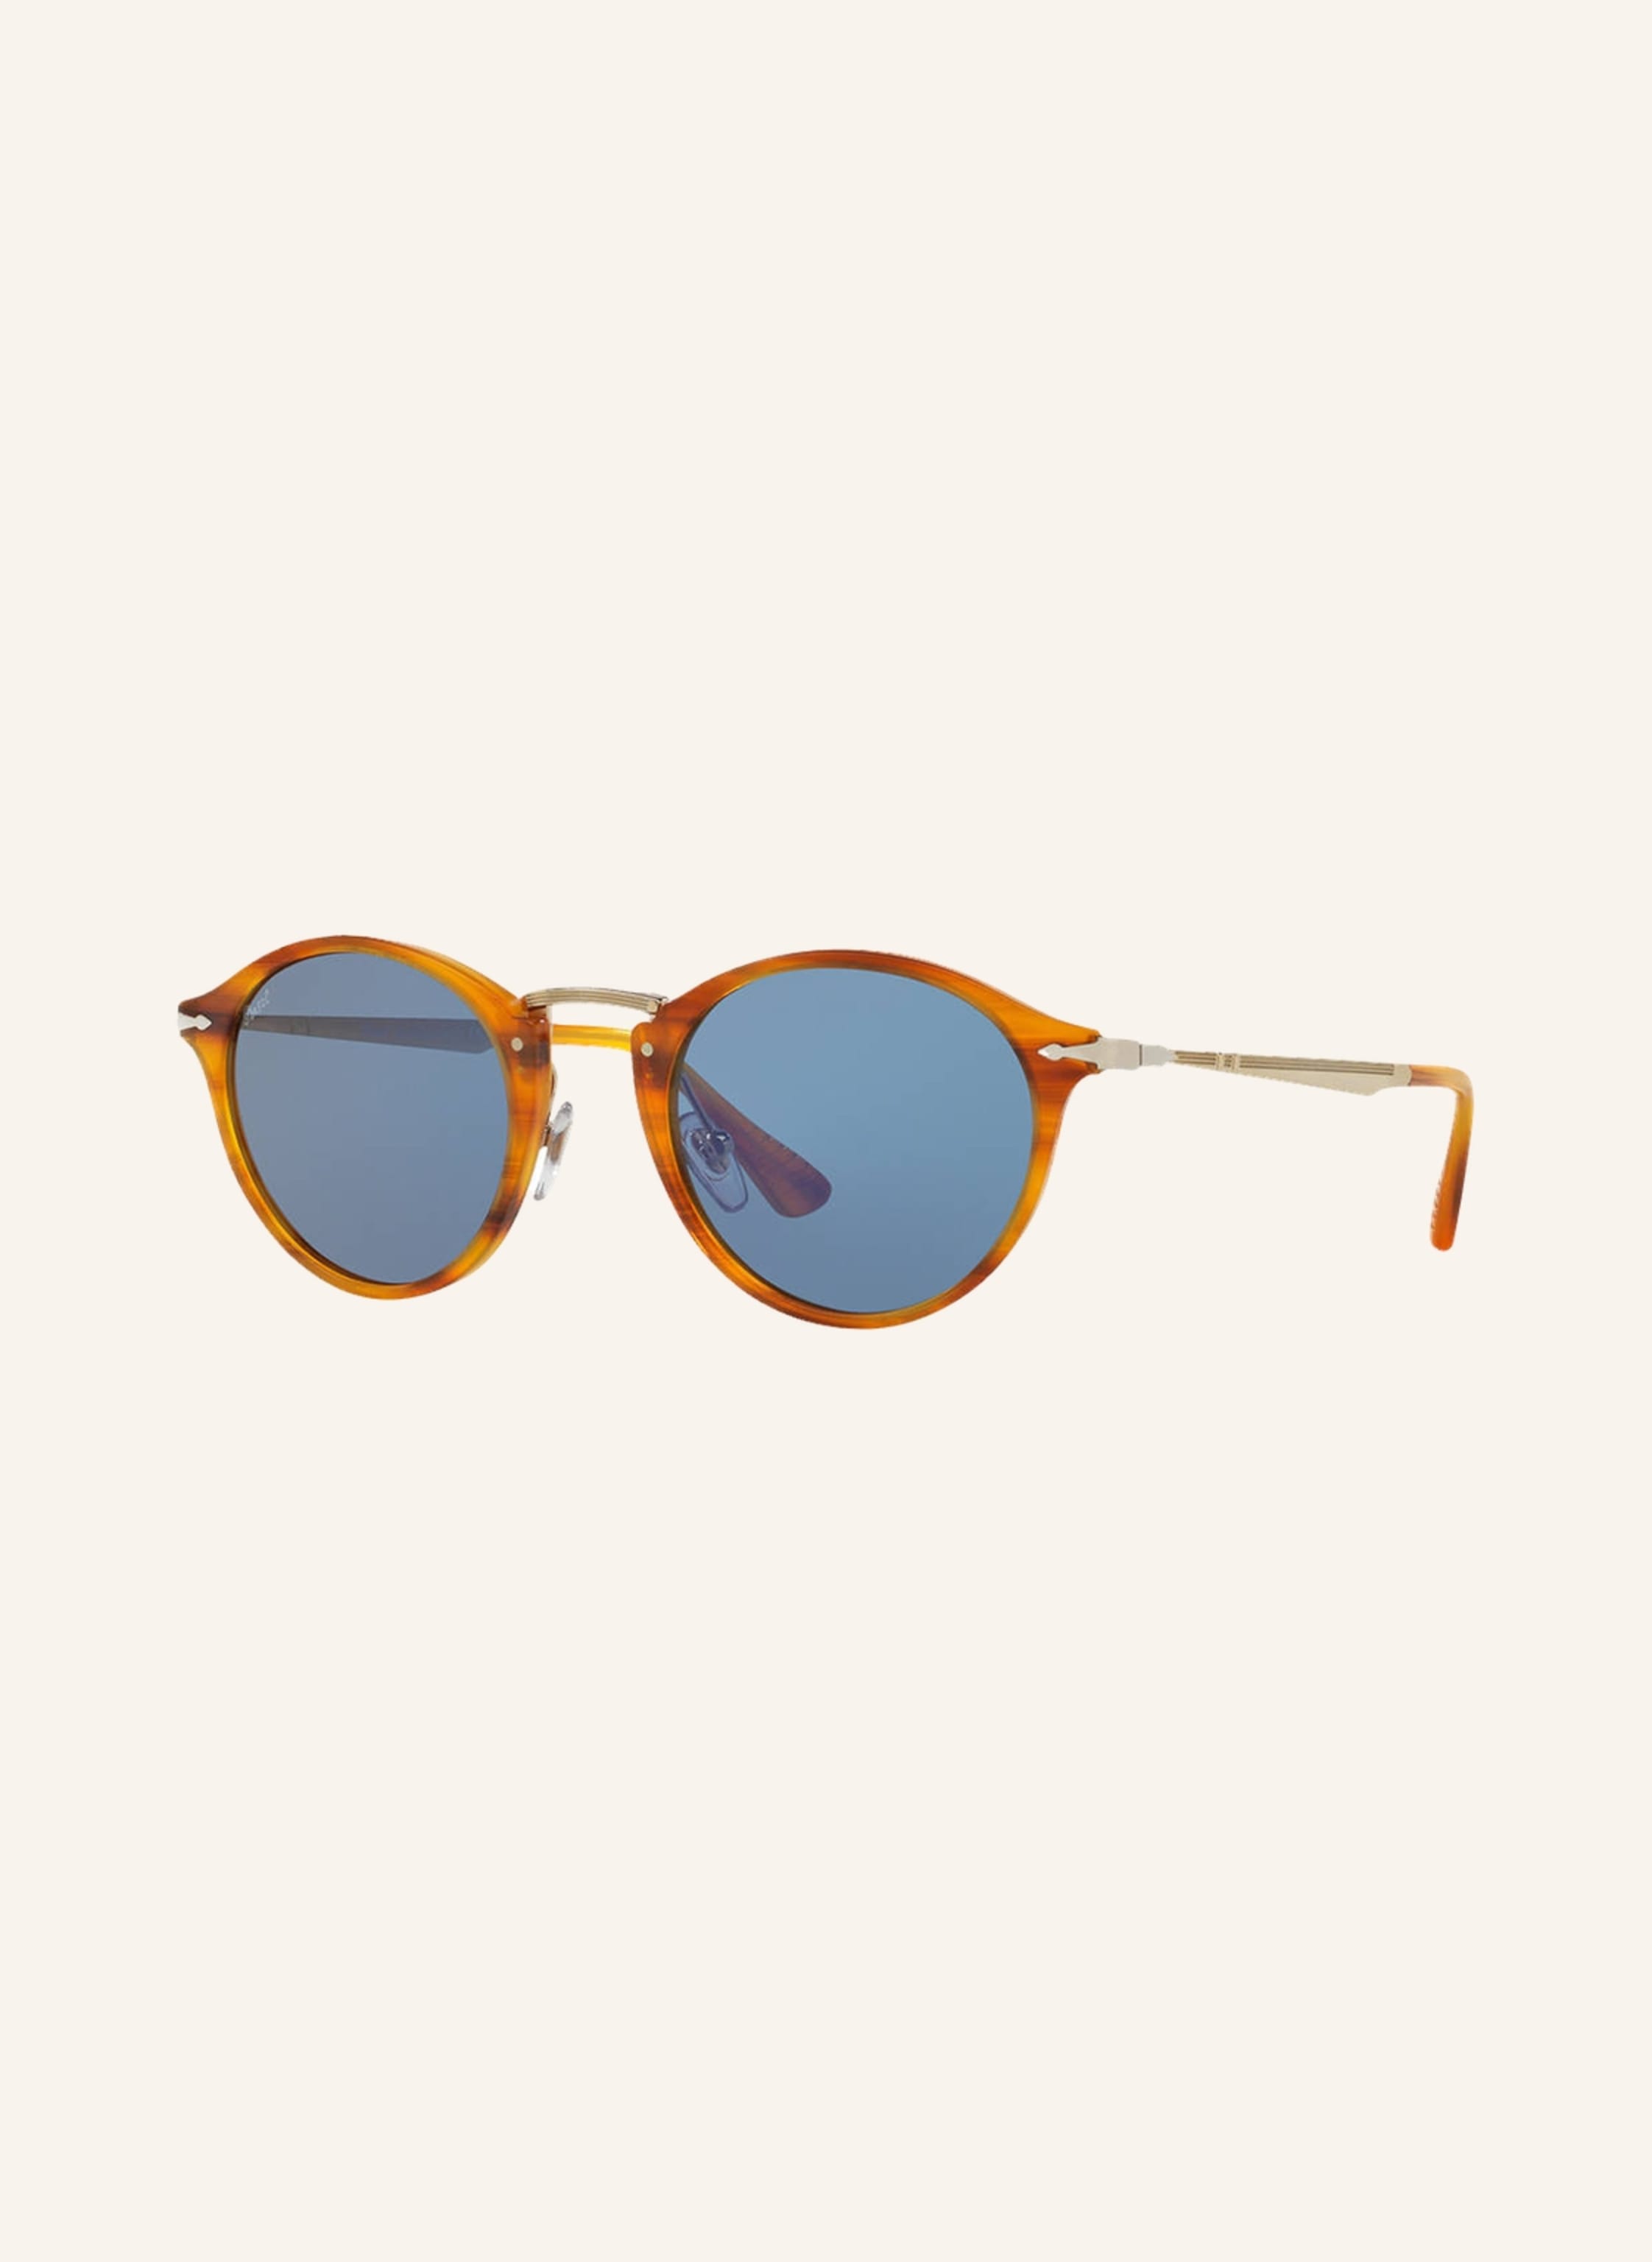 Persol Talented Mr. Ripley Sunglasses | Uncrate Supply